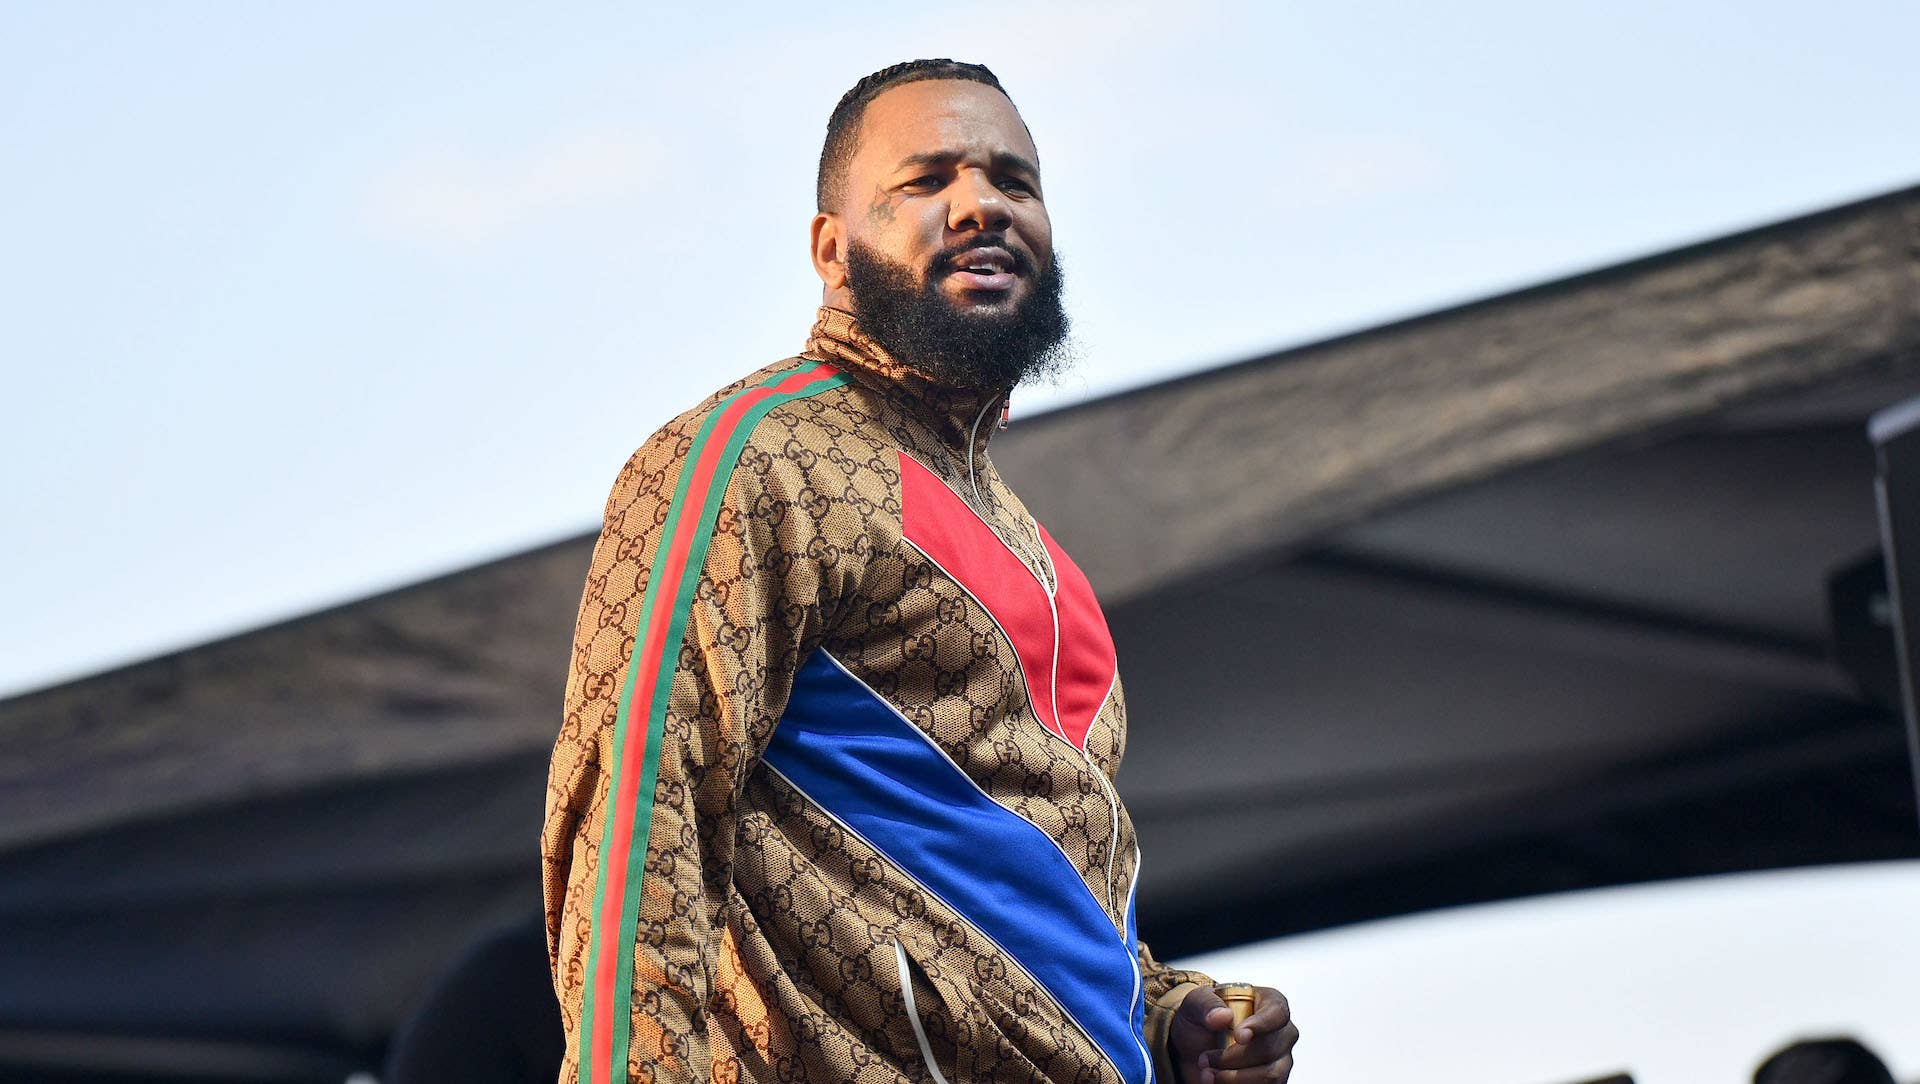 The Game performing onstage during Summertime In LBC